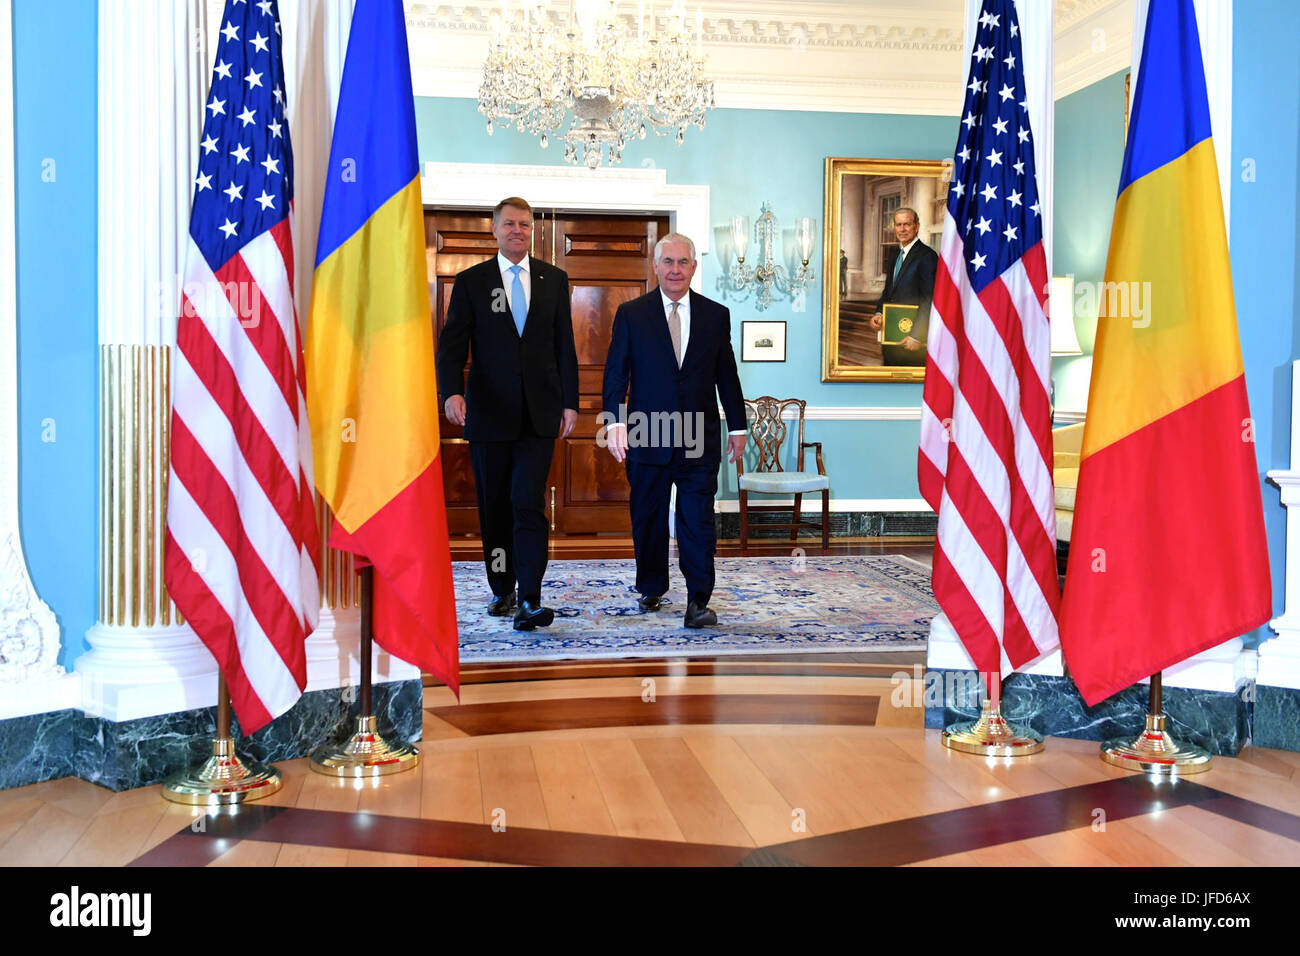 U.S. Secretary of State Rex Tillerson and Romanian President Klaus Werner Iohannis meet before reporters before their bilateral meeting at the U.S. Department of State in Washington, D.C., on June 9, 2017. [/ ] Stock Photo